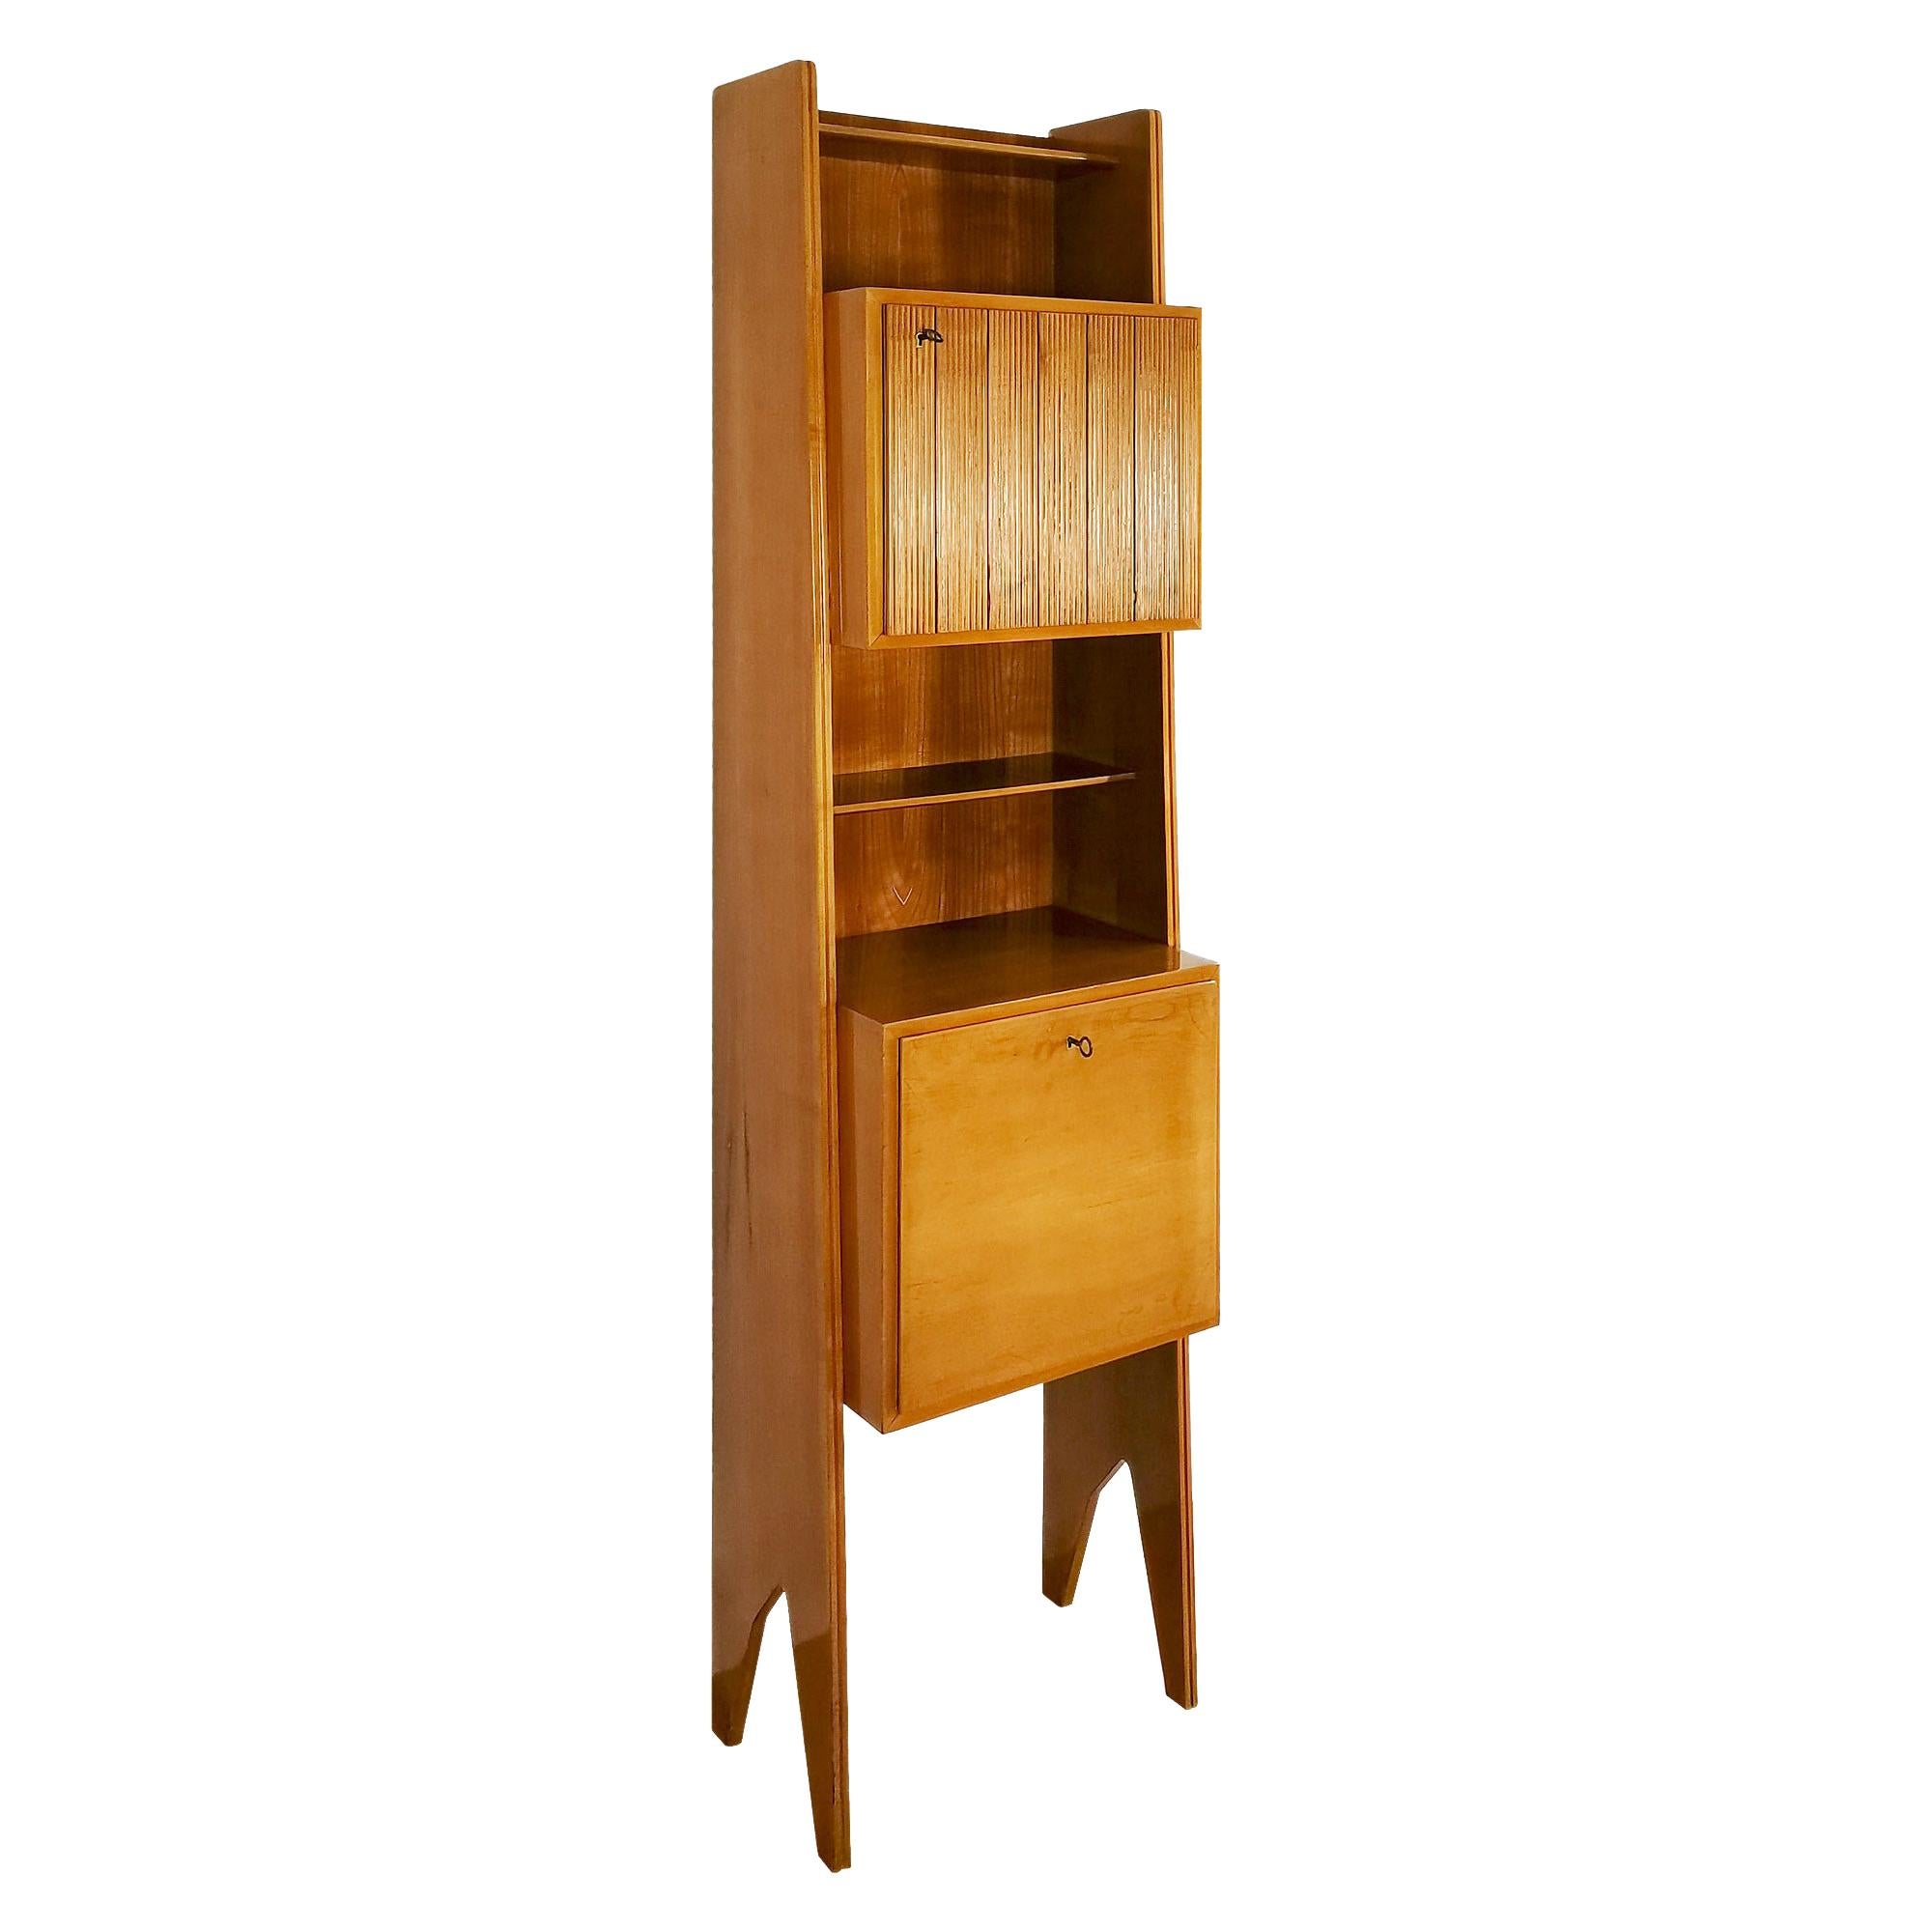 Mid-Century Modern Cherry Wood Bookcase With Shelves and Two Doors - Italy For Sale